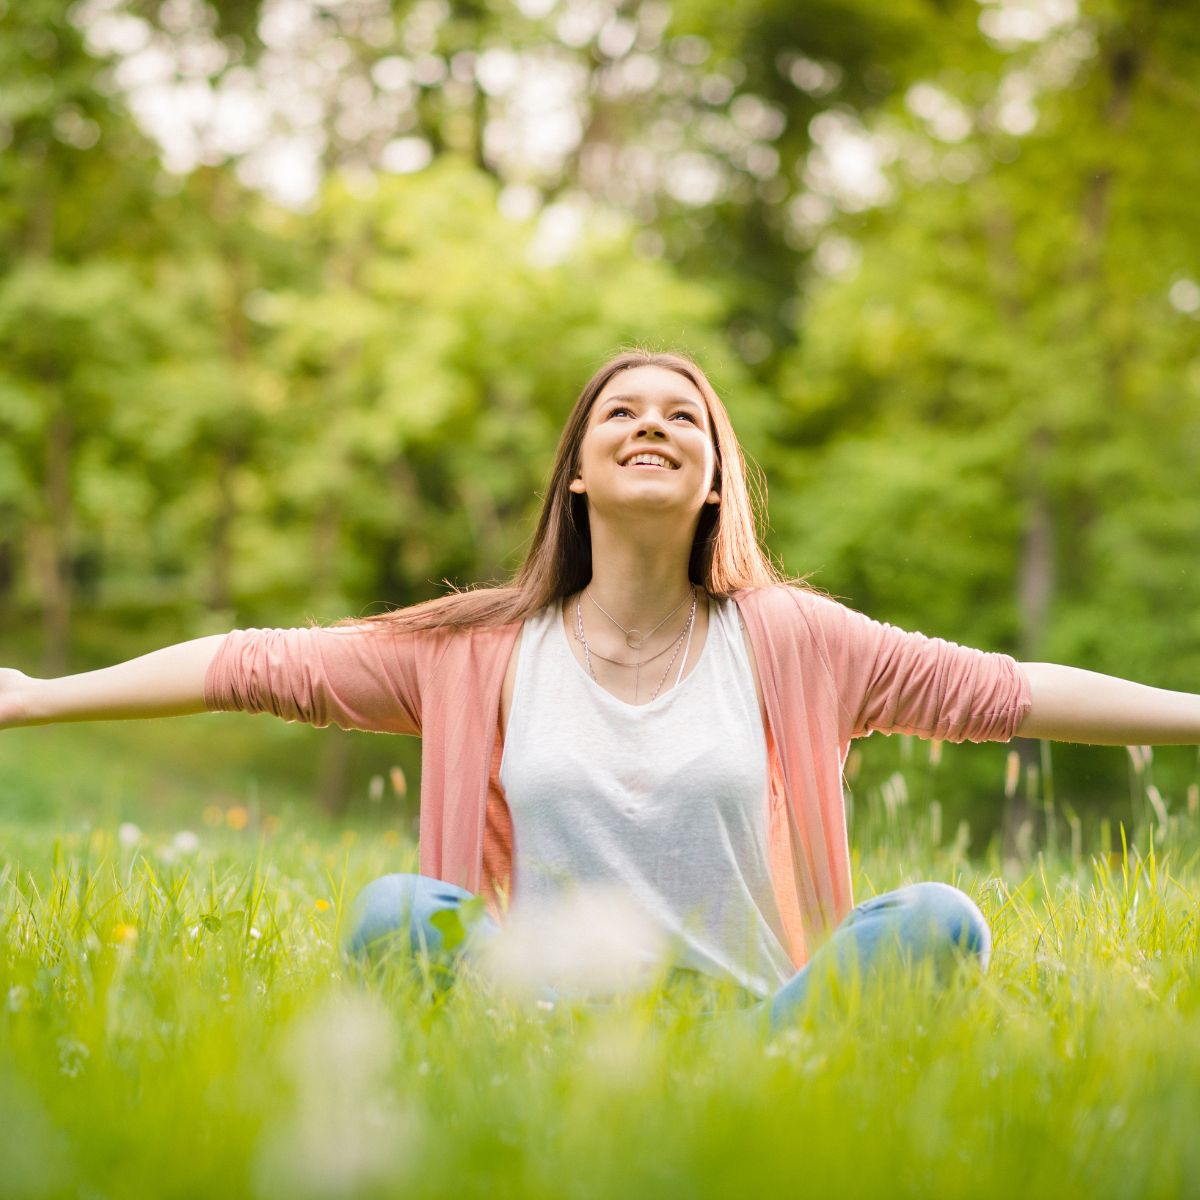 15 Ways to Live a Life of Contentment